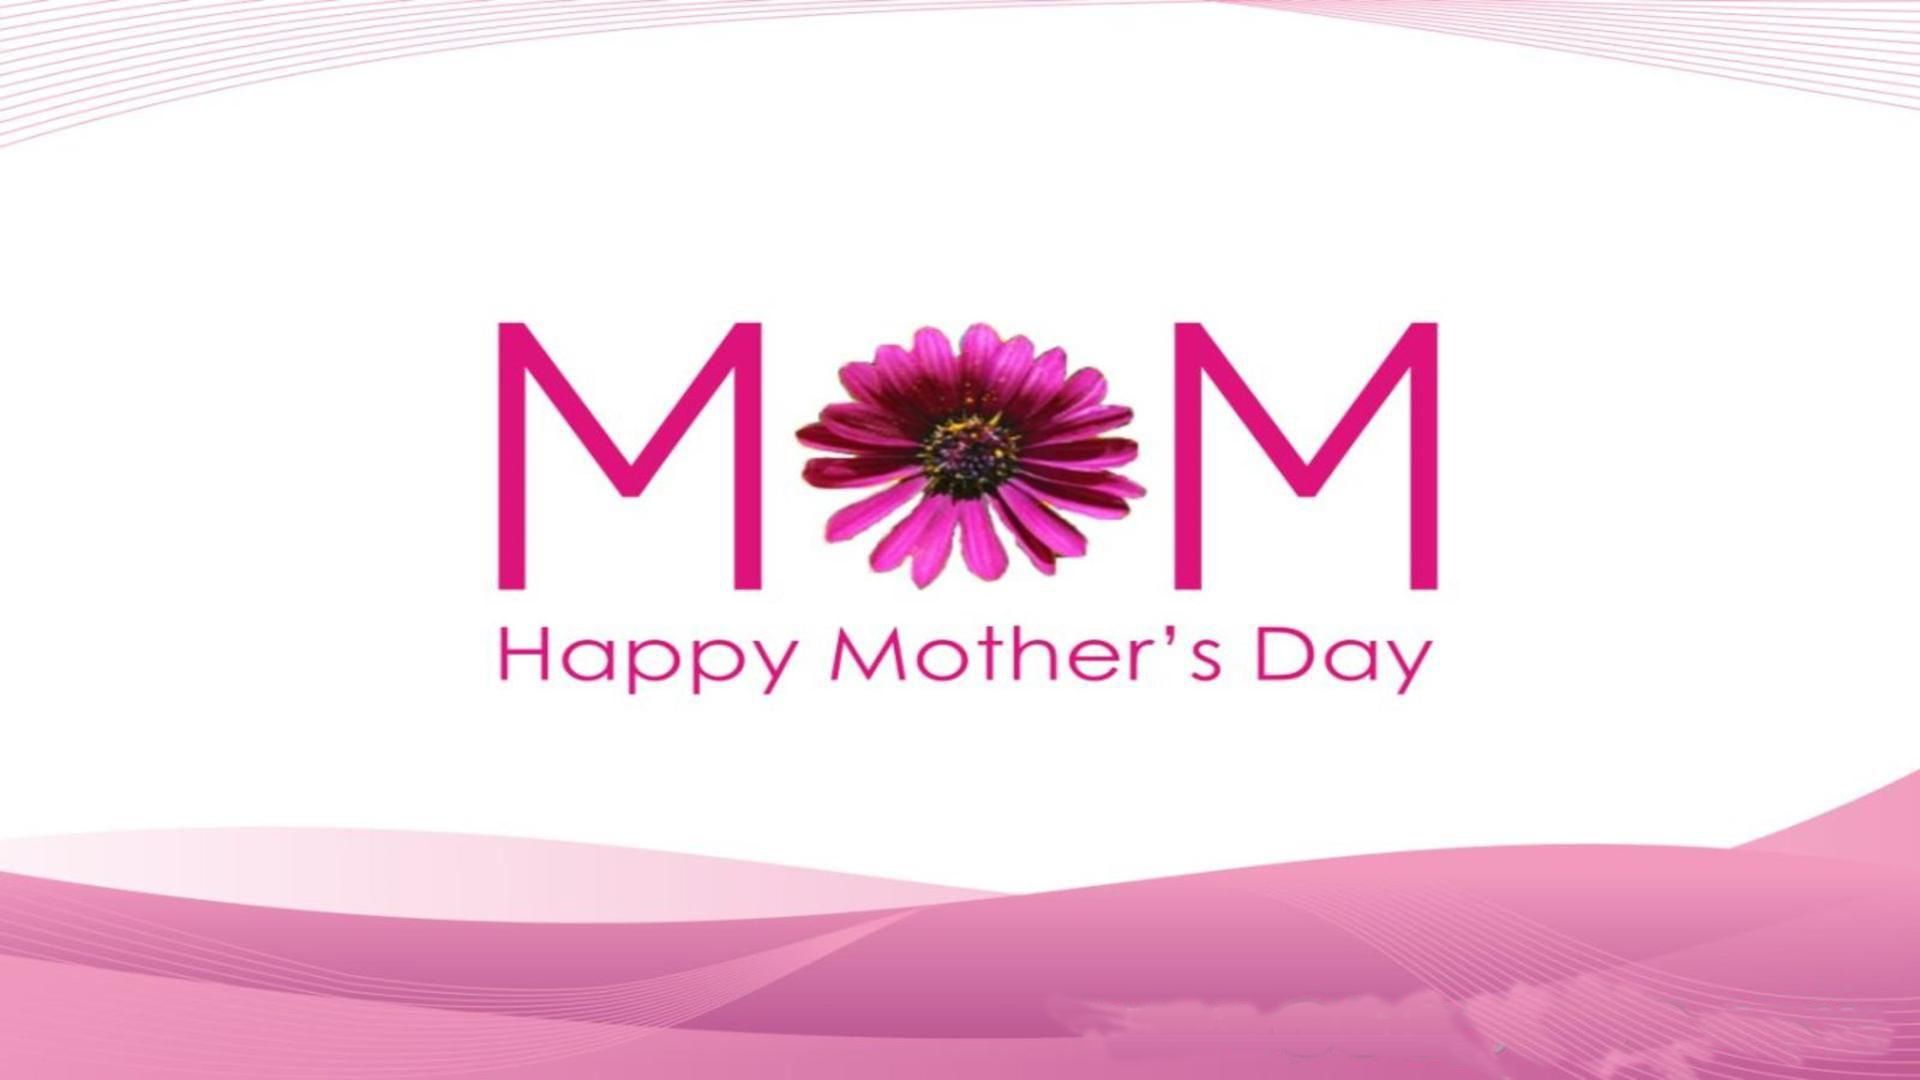 Mother's Day | Live HD Wallpaper HQ Pictures, Images, Photos ...